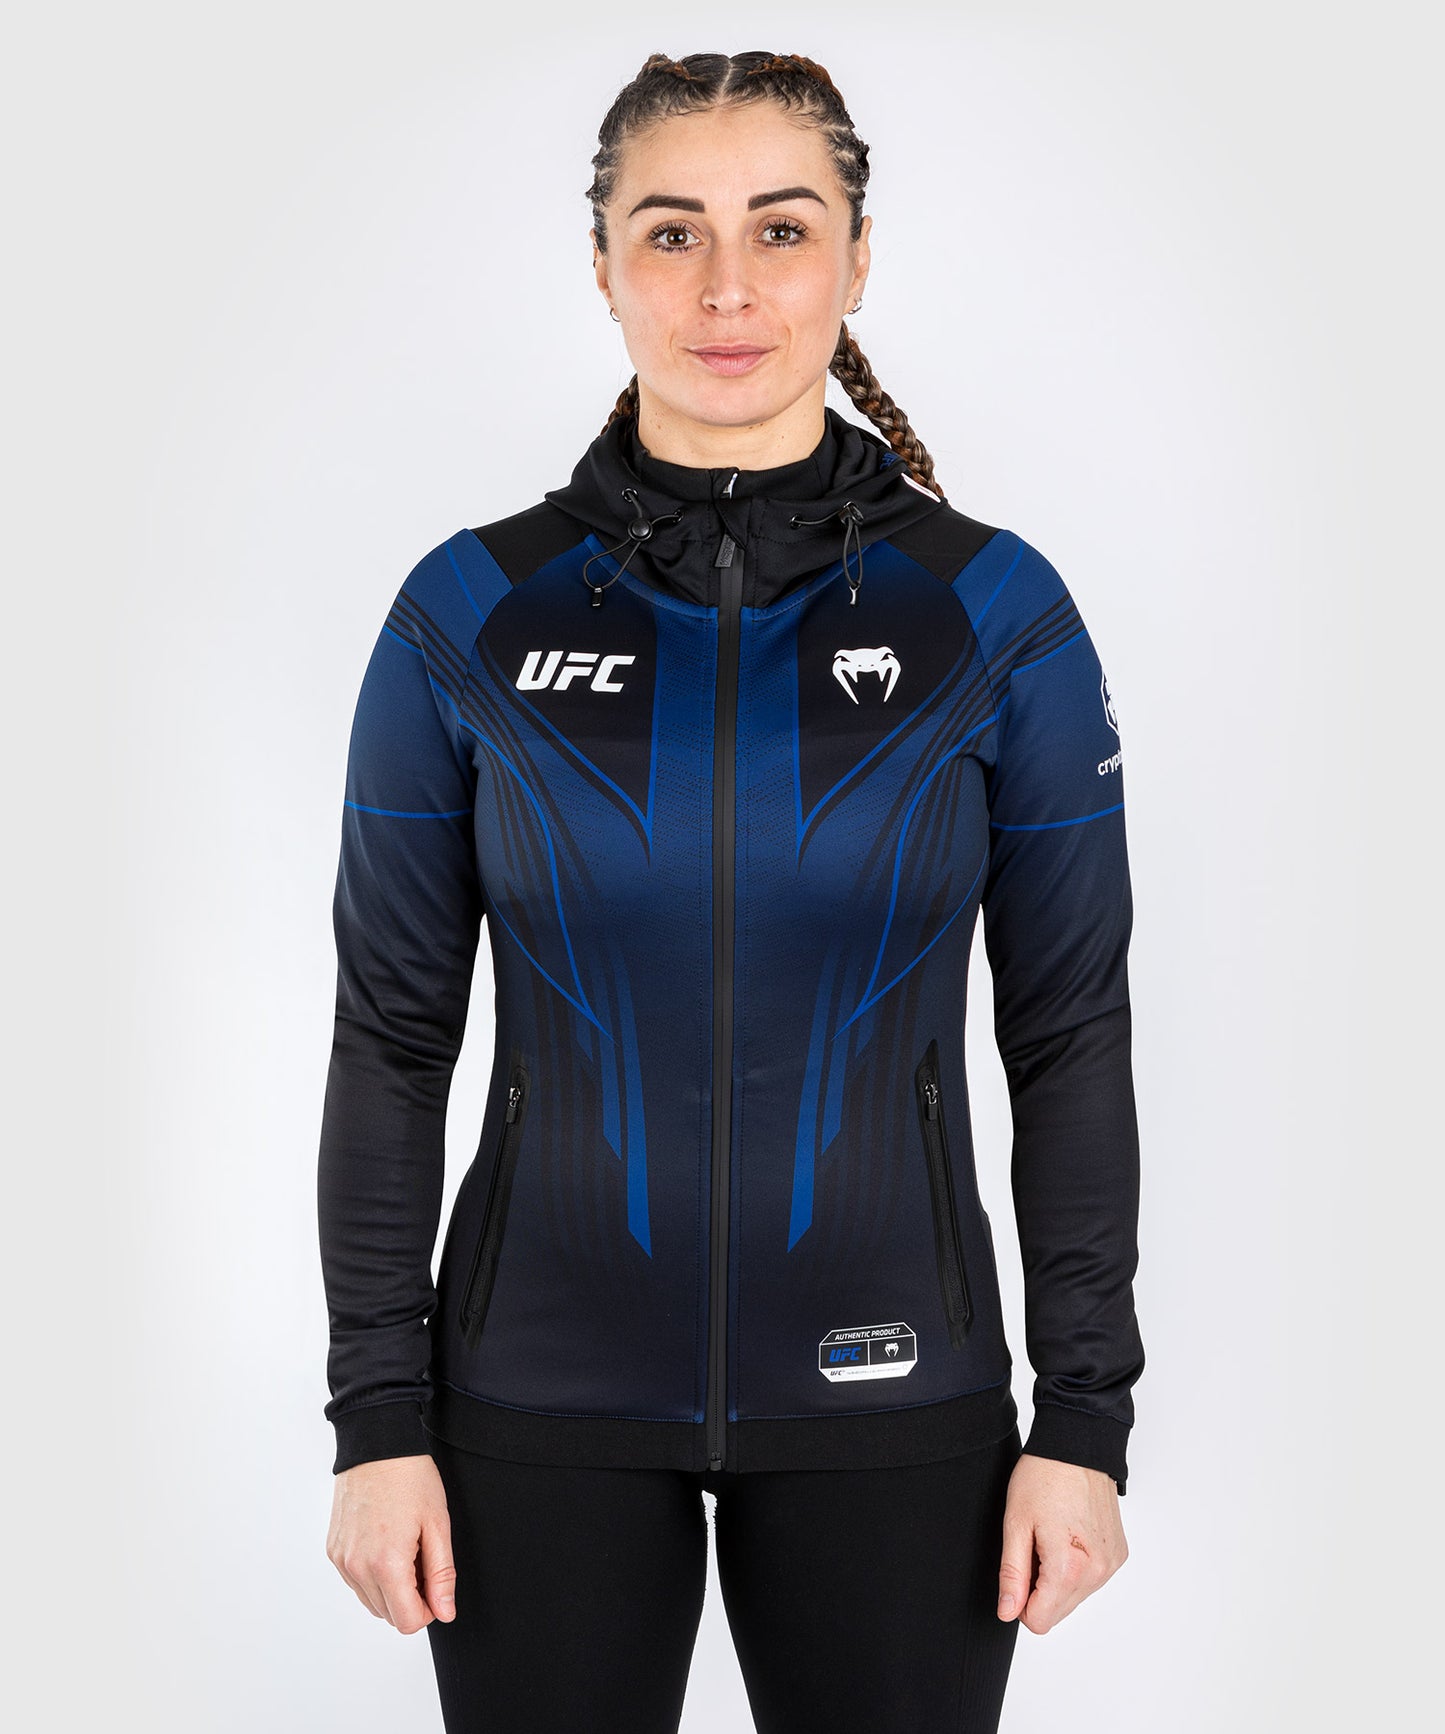 UFC Venum Personalized Authentic Fight Night 2.0 Kit by Venum Women's Walkout Hoodie - Midnight Edition